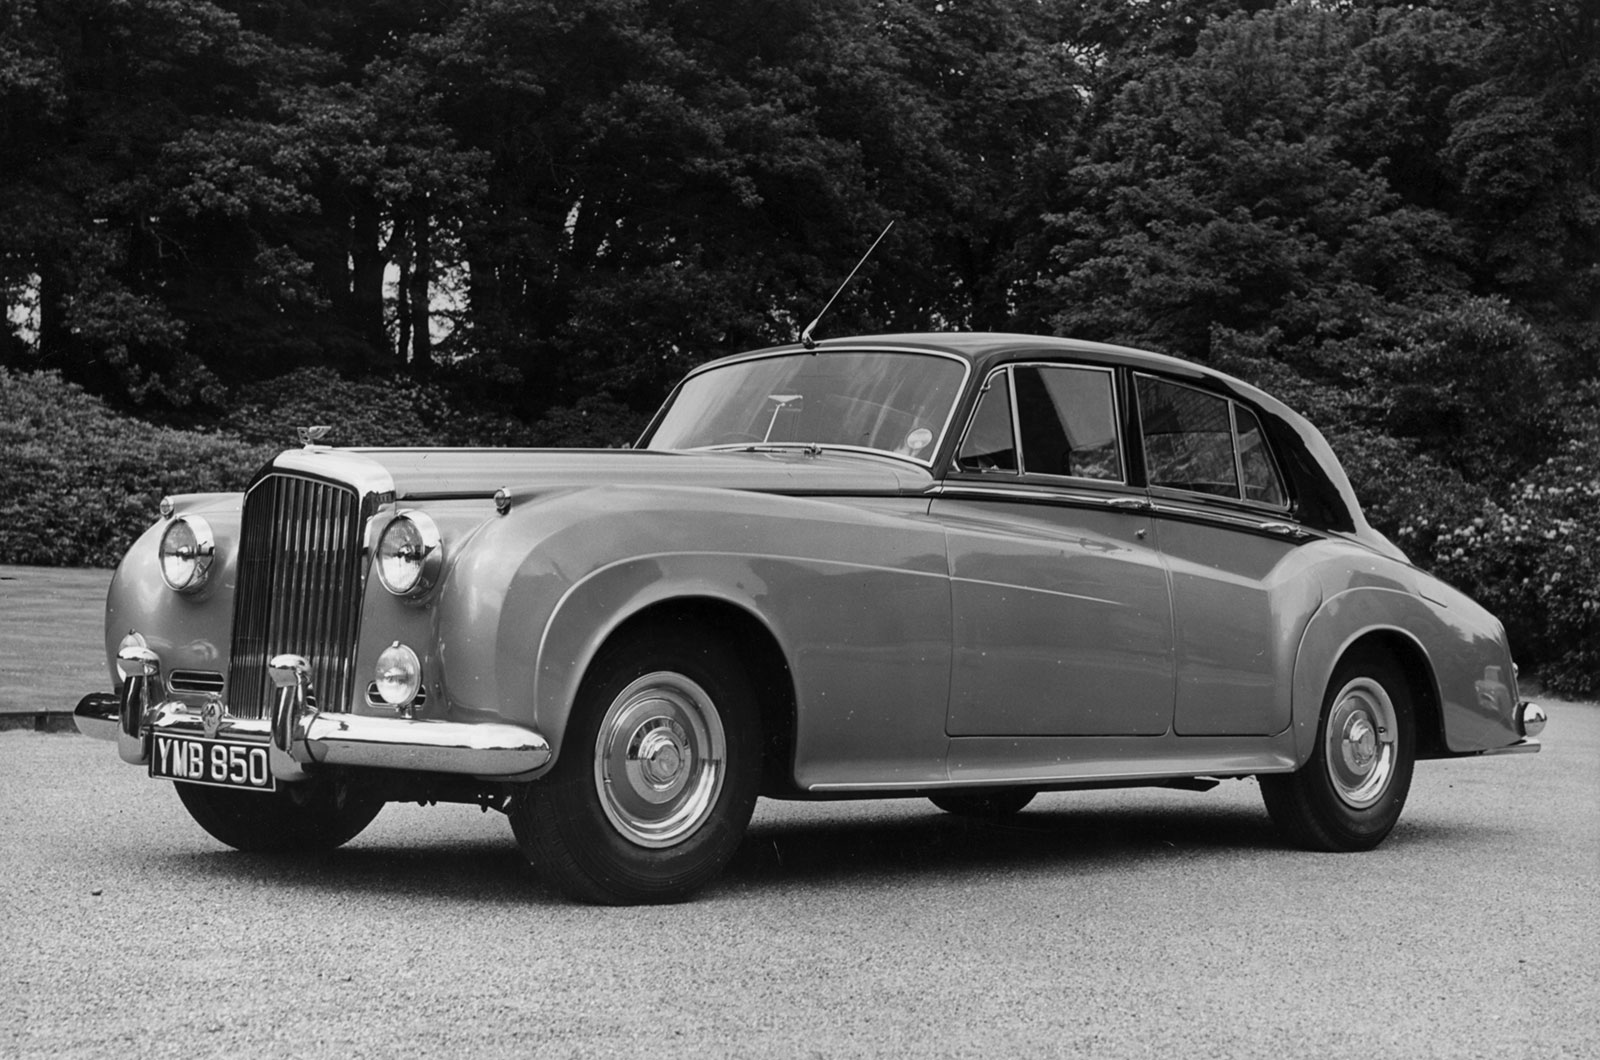 <p><span>When Rolls-Royce introduced the <strong>Silver Cloud </strong>in 1955 it could also be ordered as a Bentley – which is what most customers opted for. Initially known as the <strong>S1</strong>, power came from a <strong>4887cc </strong>straight-six, but when the S2 was launched in 1959 it brought a 6230cc V8. The S3 of 1962 retained the V8 but brought twin headlamps and a raft of improvements throughout the car. All three S-Series iterations could be ordered as a four-door sedan or two-door drophead coupe.</span></p>